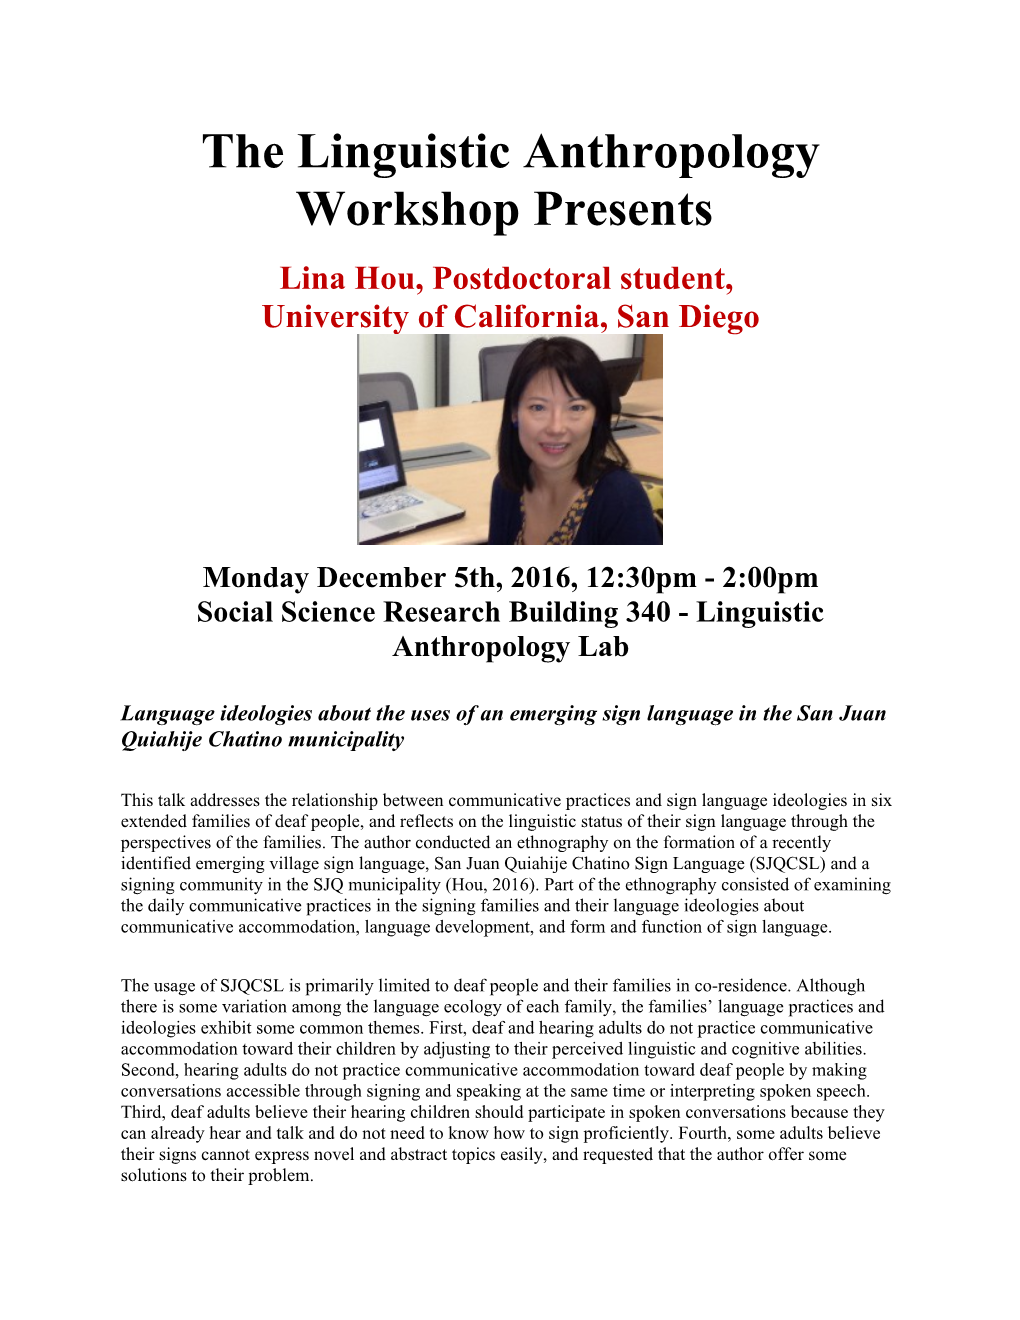 The Linguistic Anthropology Workshop Presents